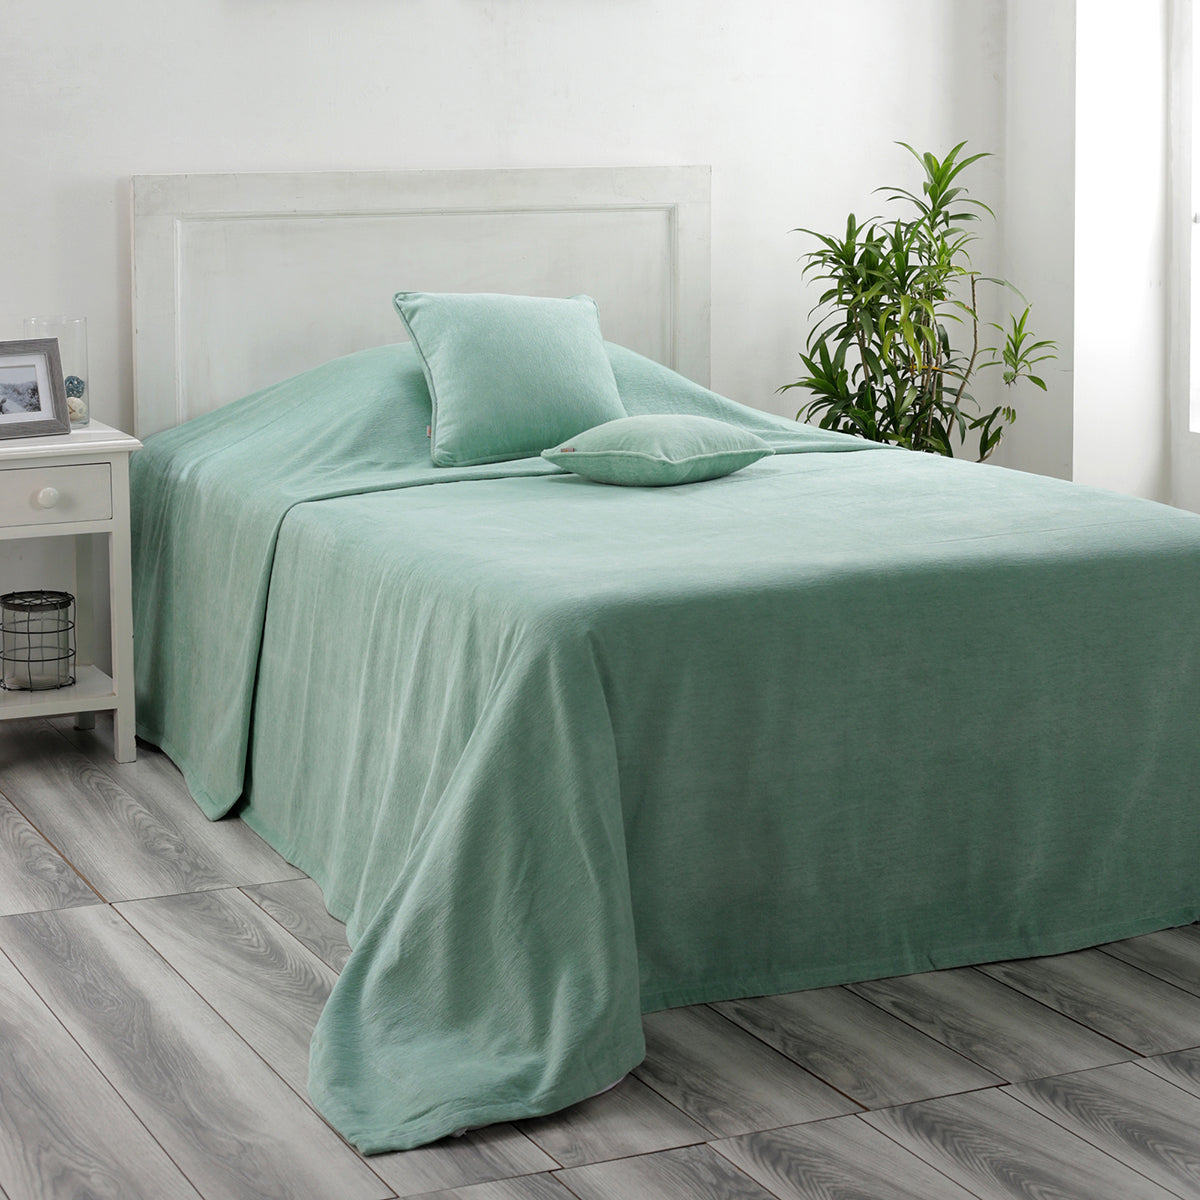 Jessica 100% Cotton Solid Woven Super Soft Dusty Jade Green Bed Cover/Blanket